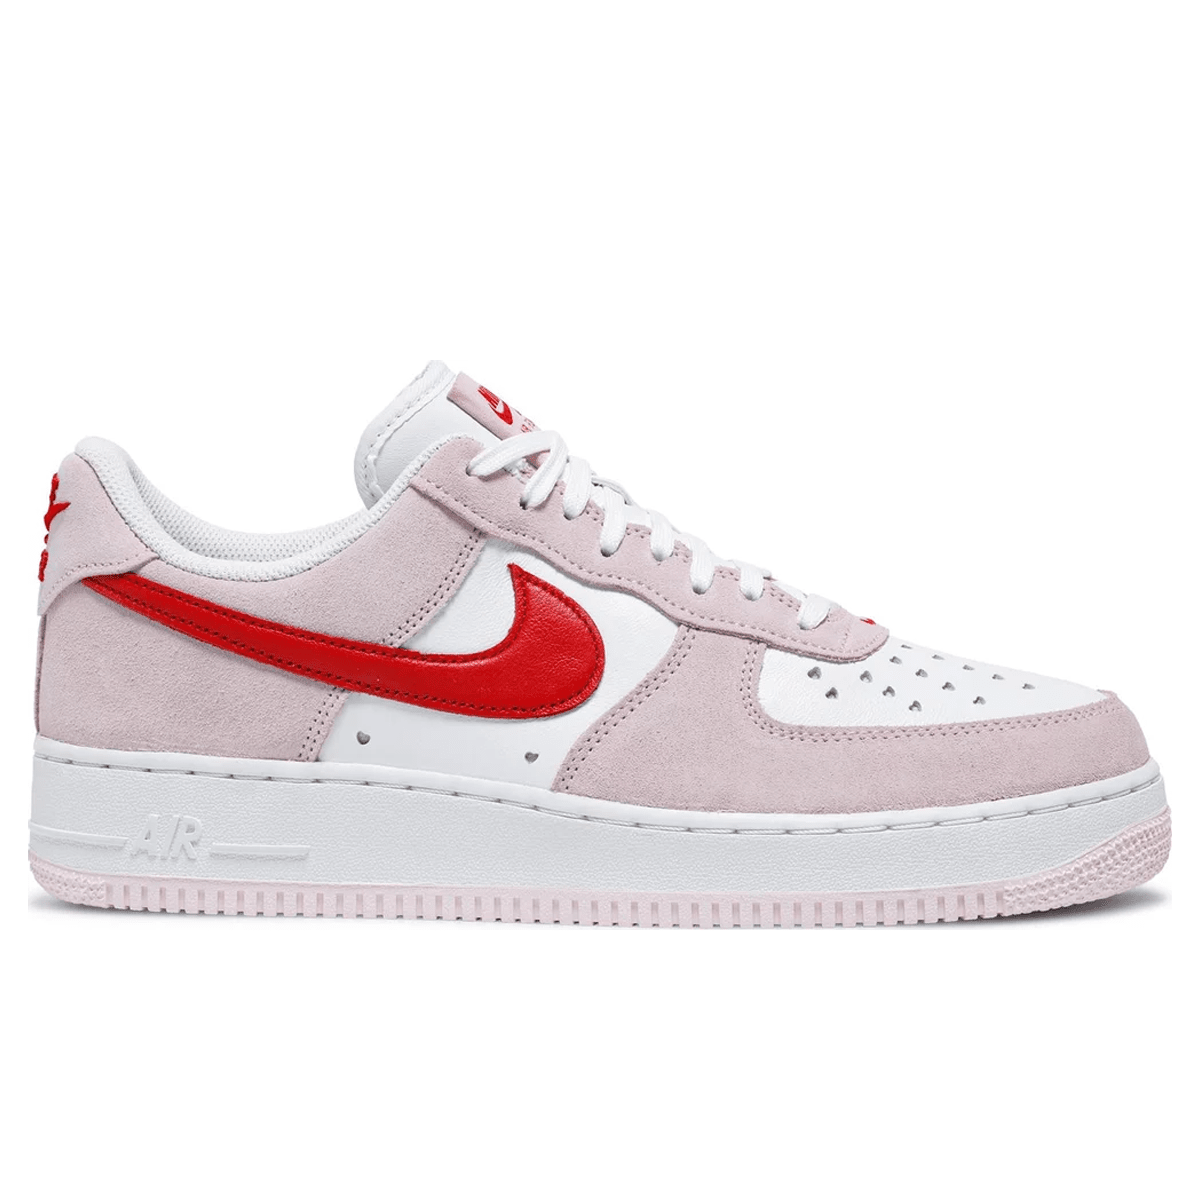 Nike Air Force 1 Valentine's Day Love Letter Nike Dunk Low Blizz Sneakers 